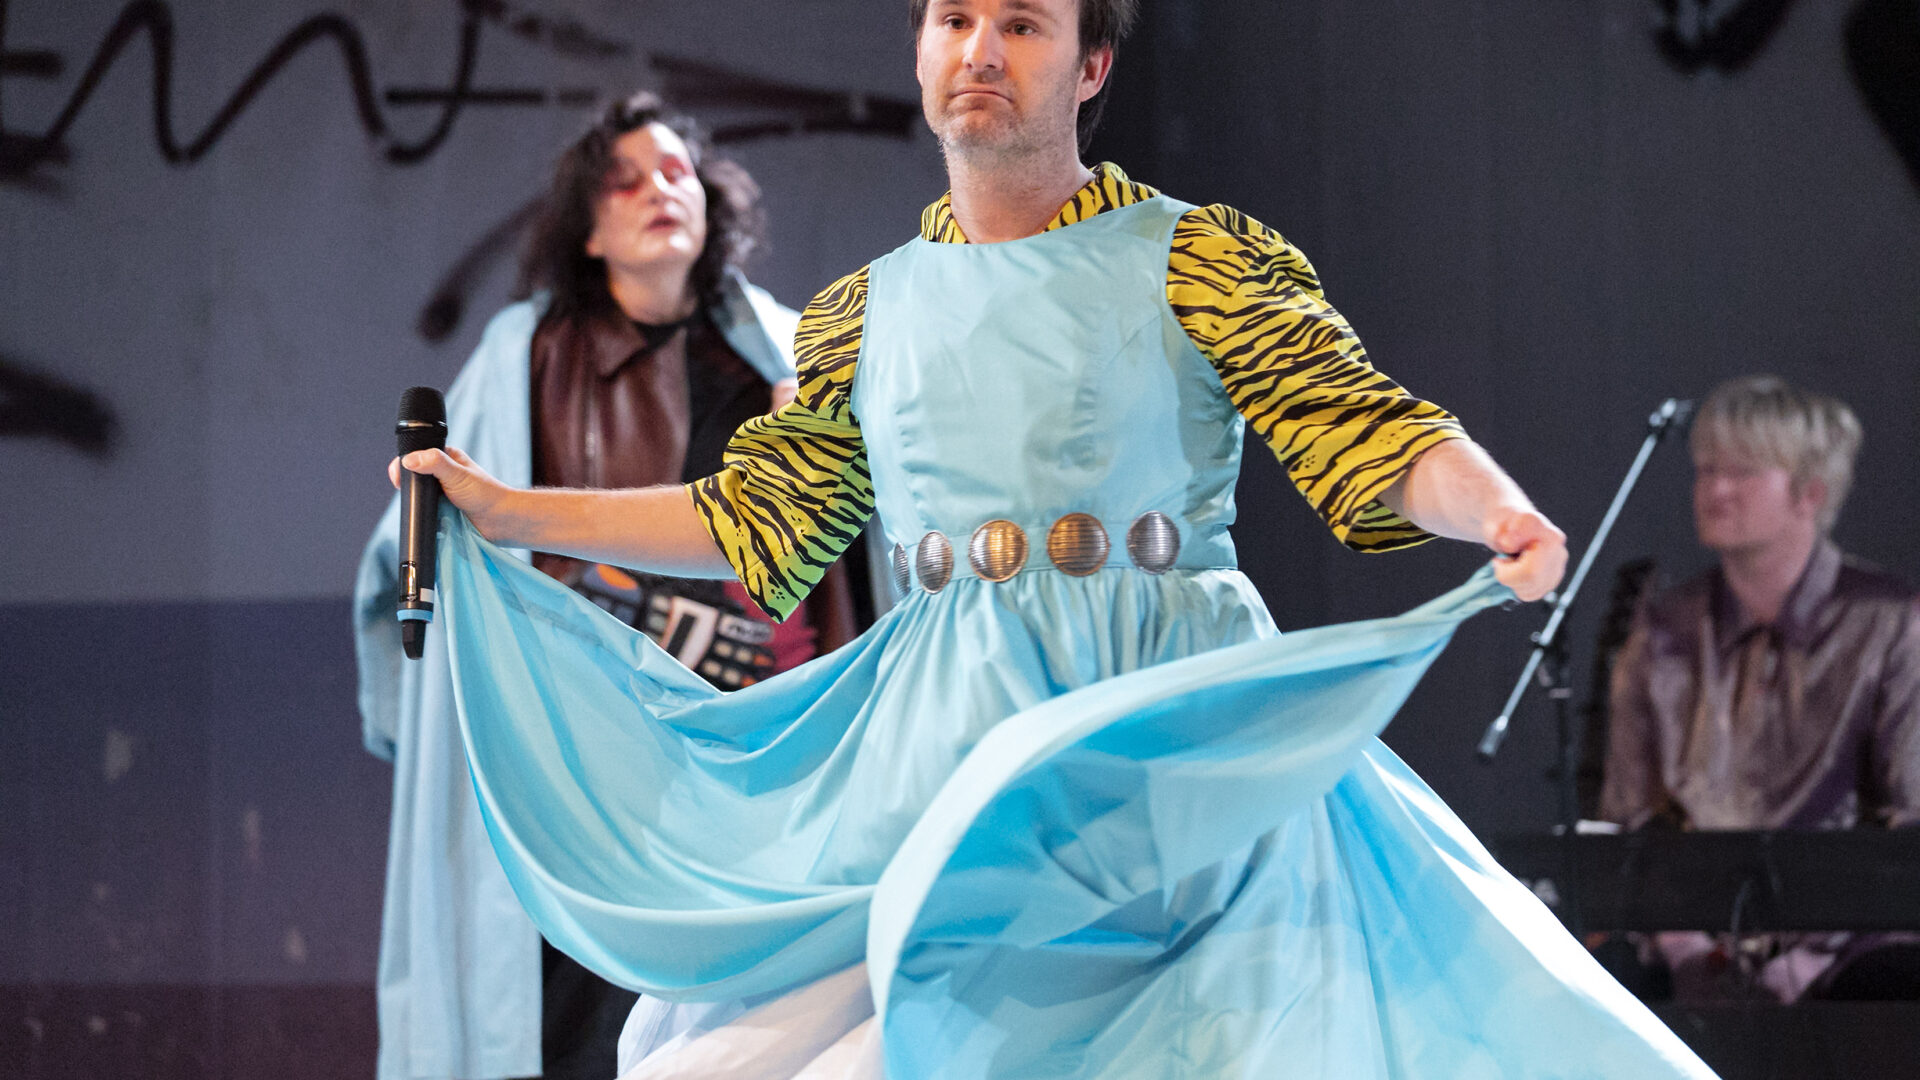 Scene photo of a performance: One man with a bright blue dress on a stage